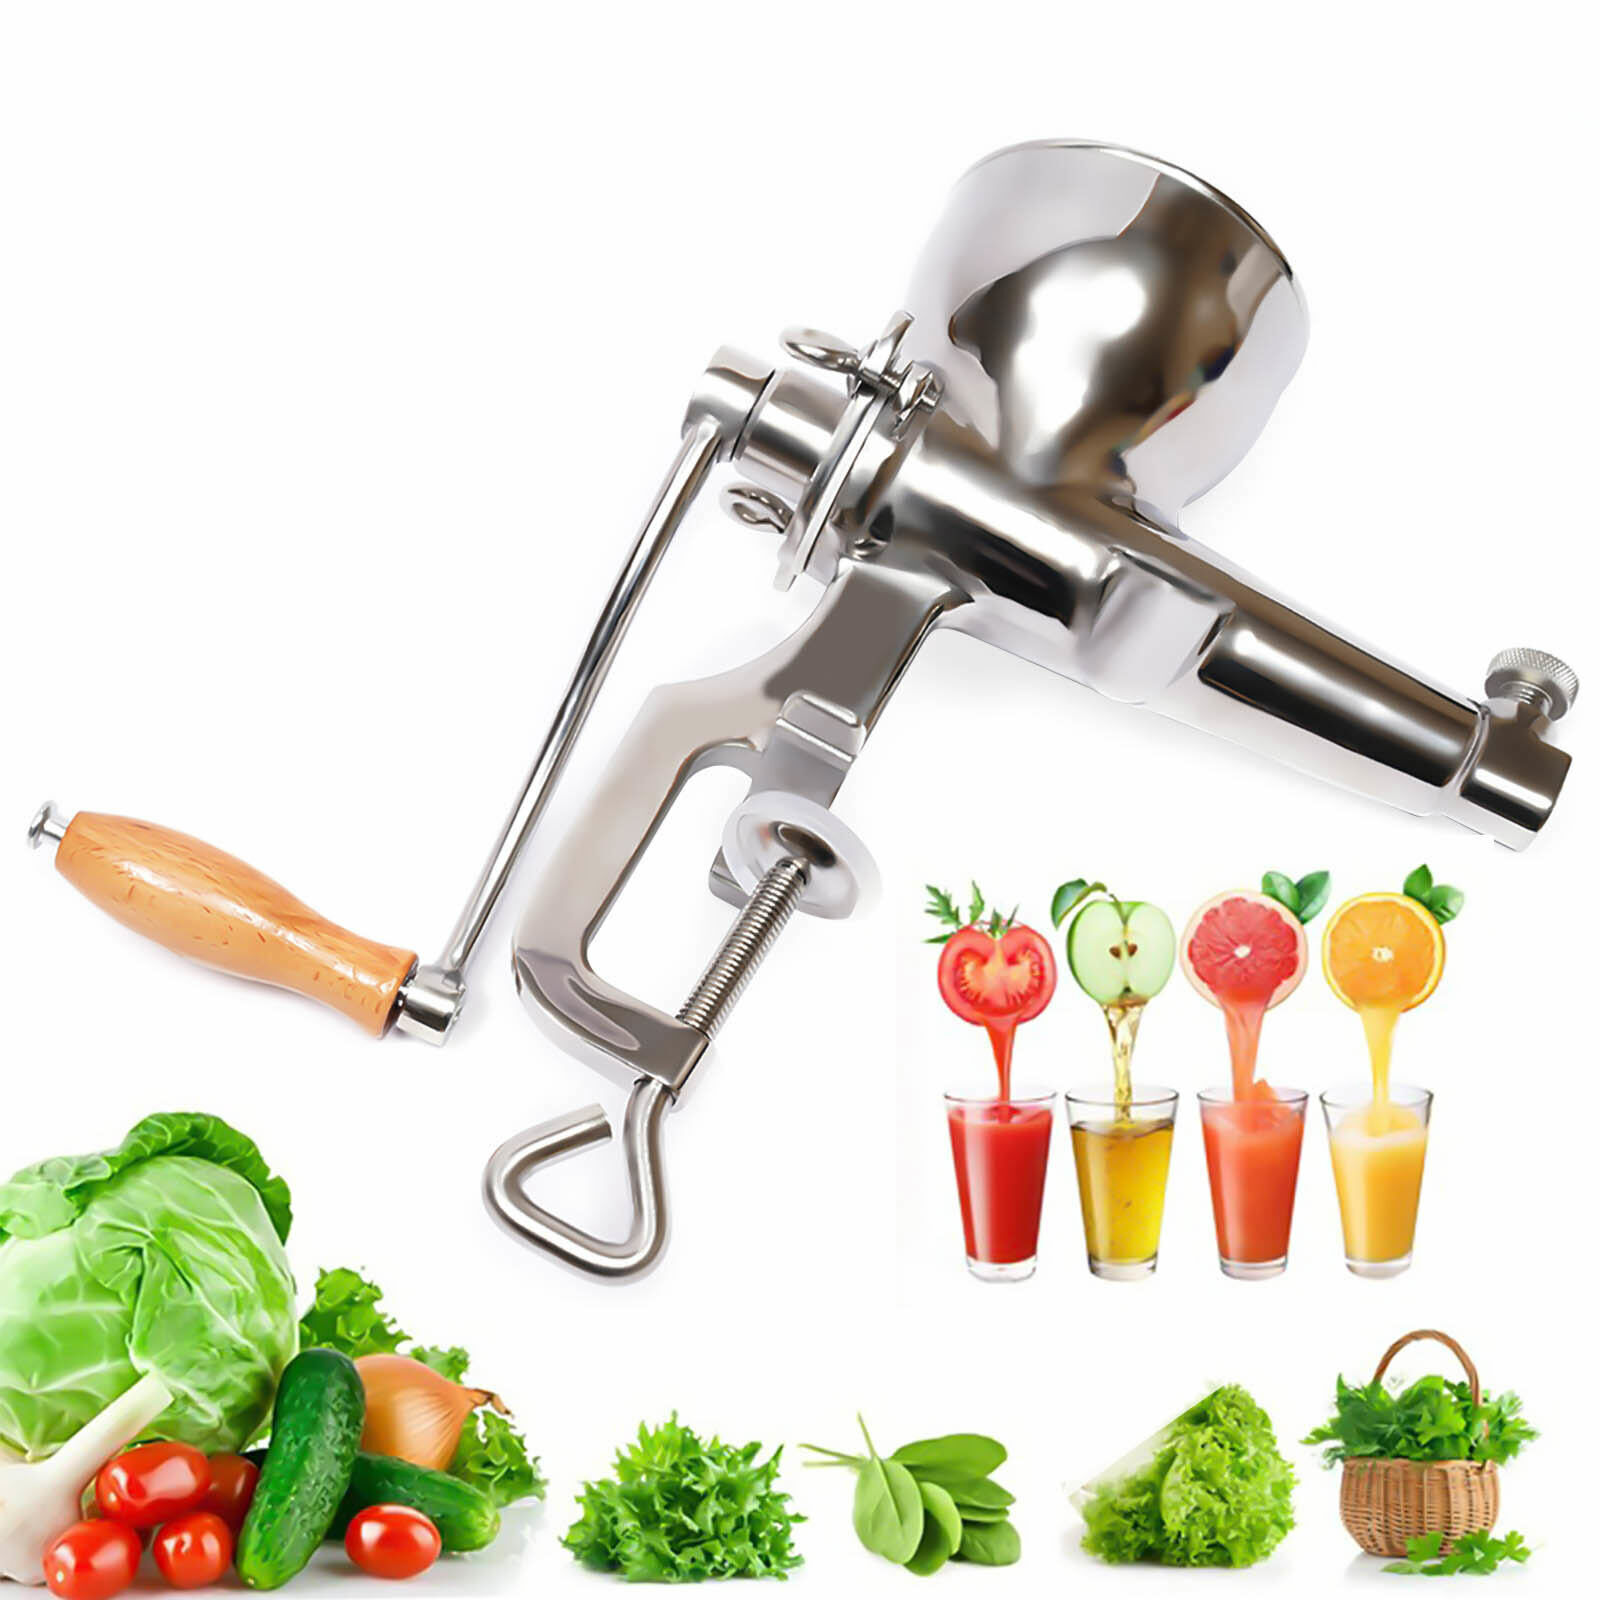 Looking to Buy The Best Wheatgrass Juicer. Check Out These 10 Key Features